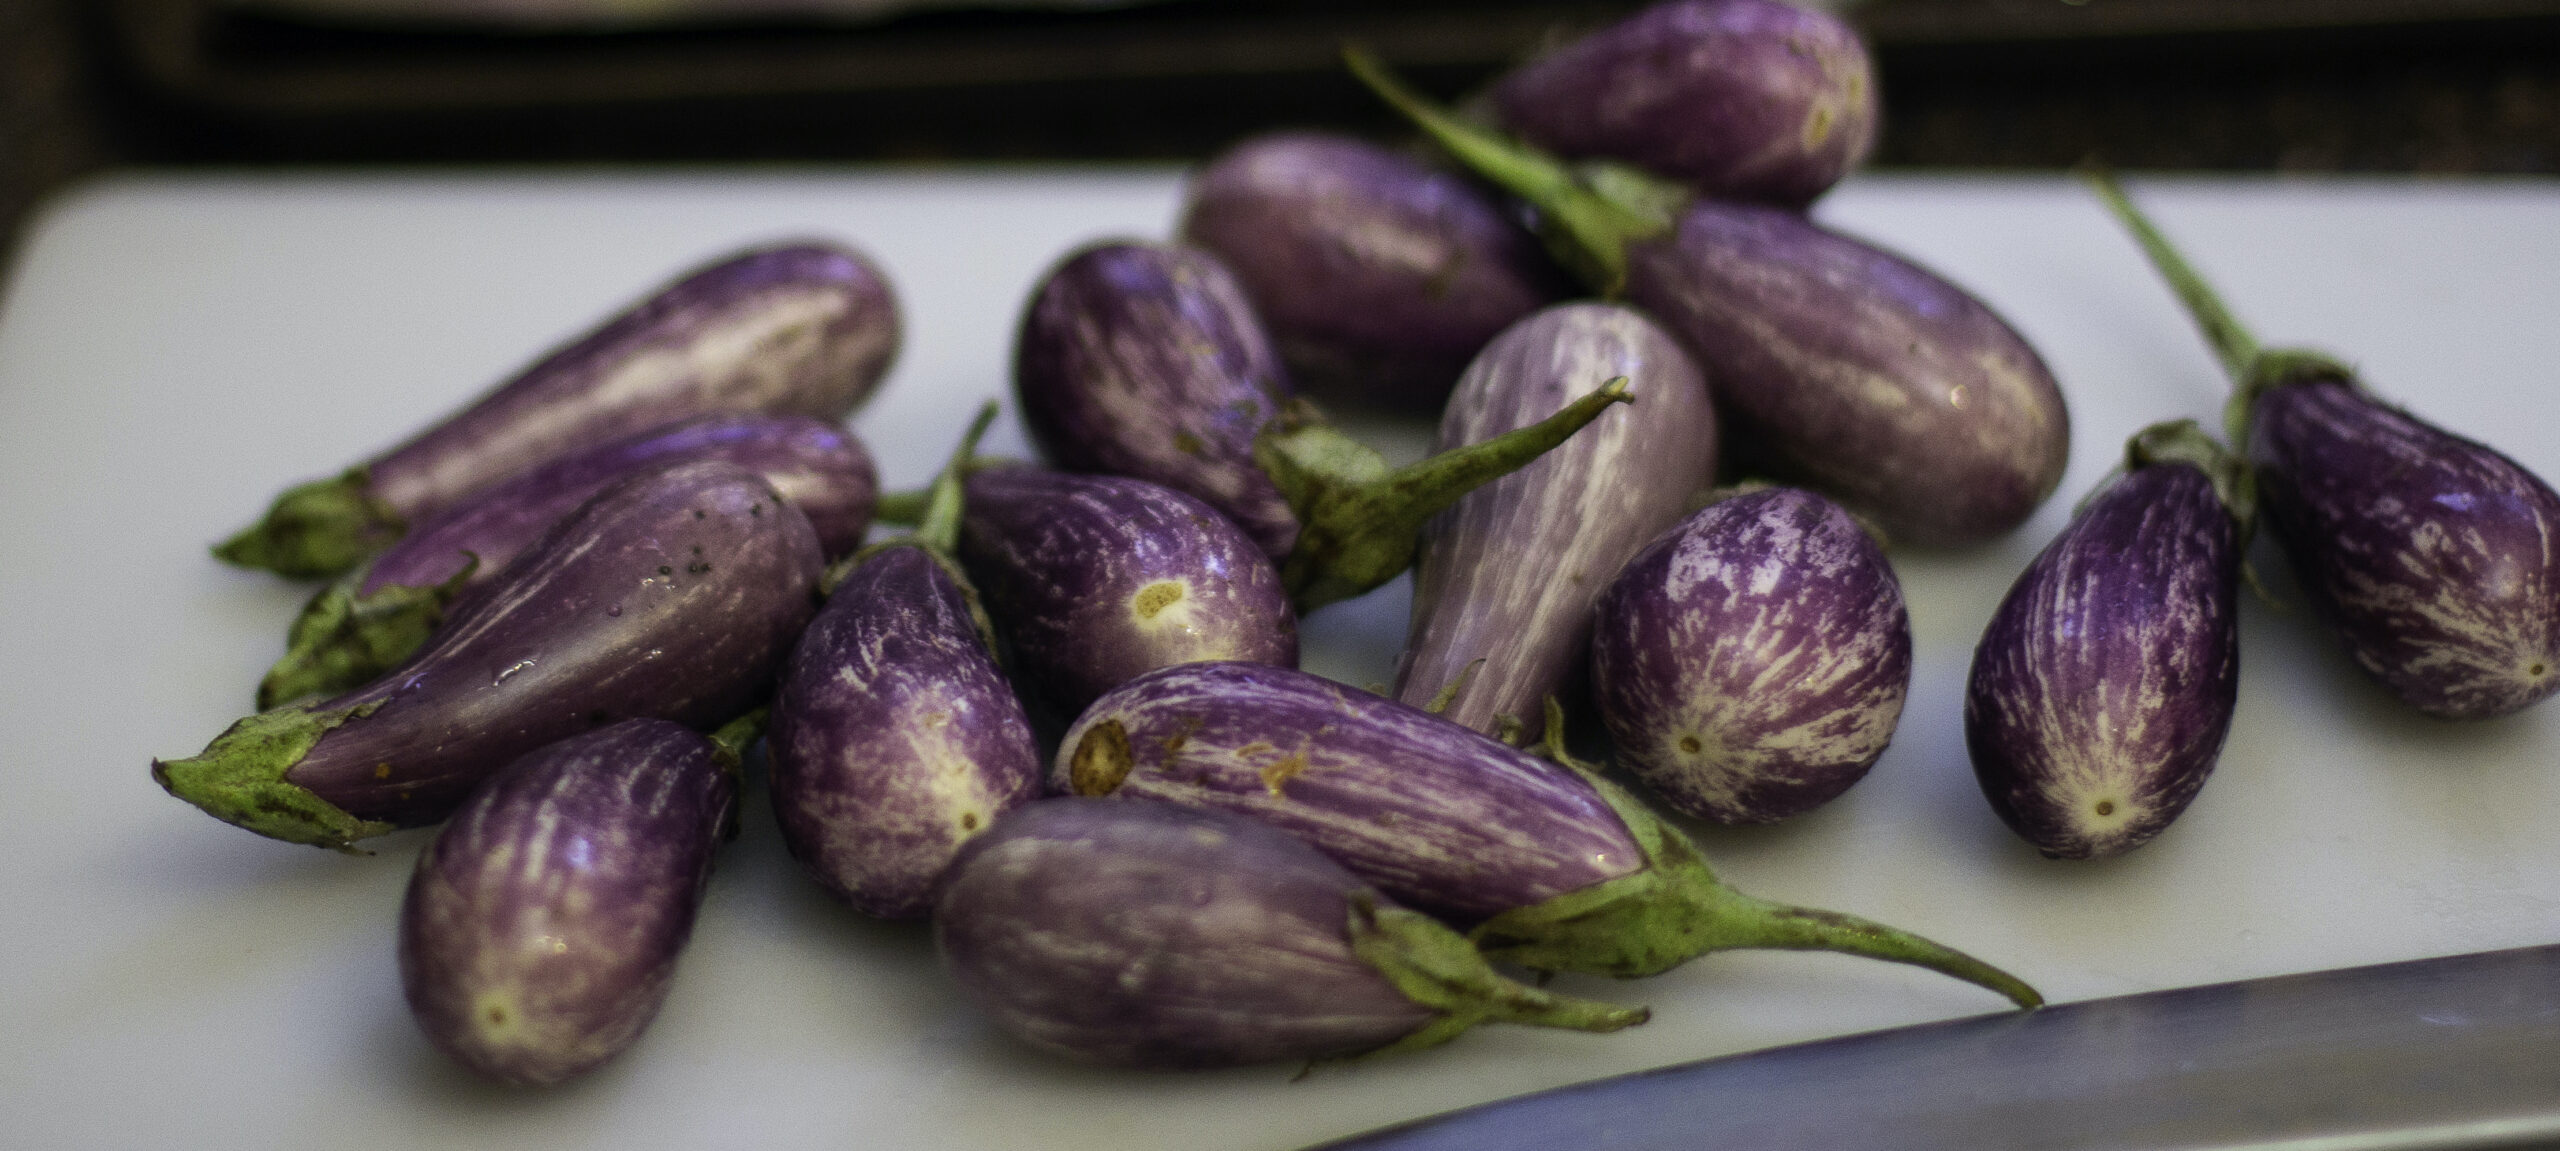 Are Aubergine and Eggplant the Same Thing? - The Cookful